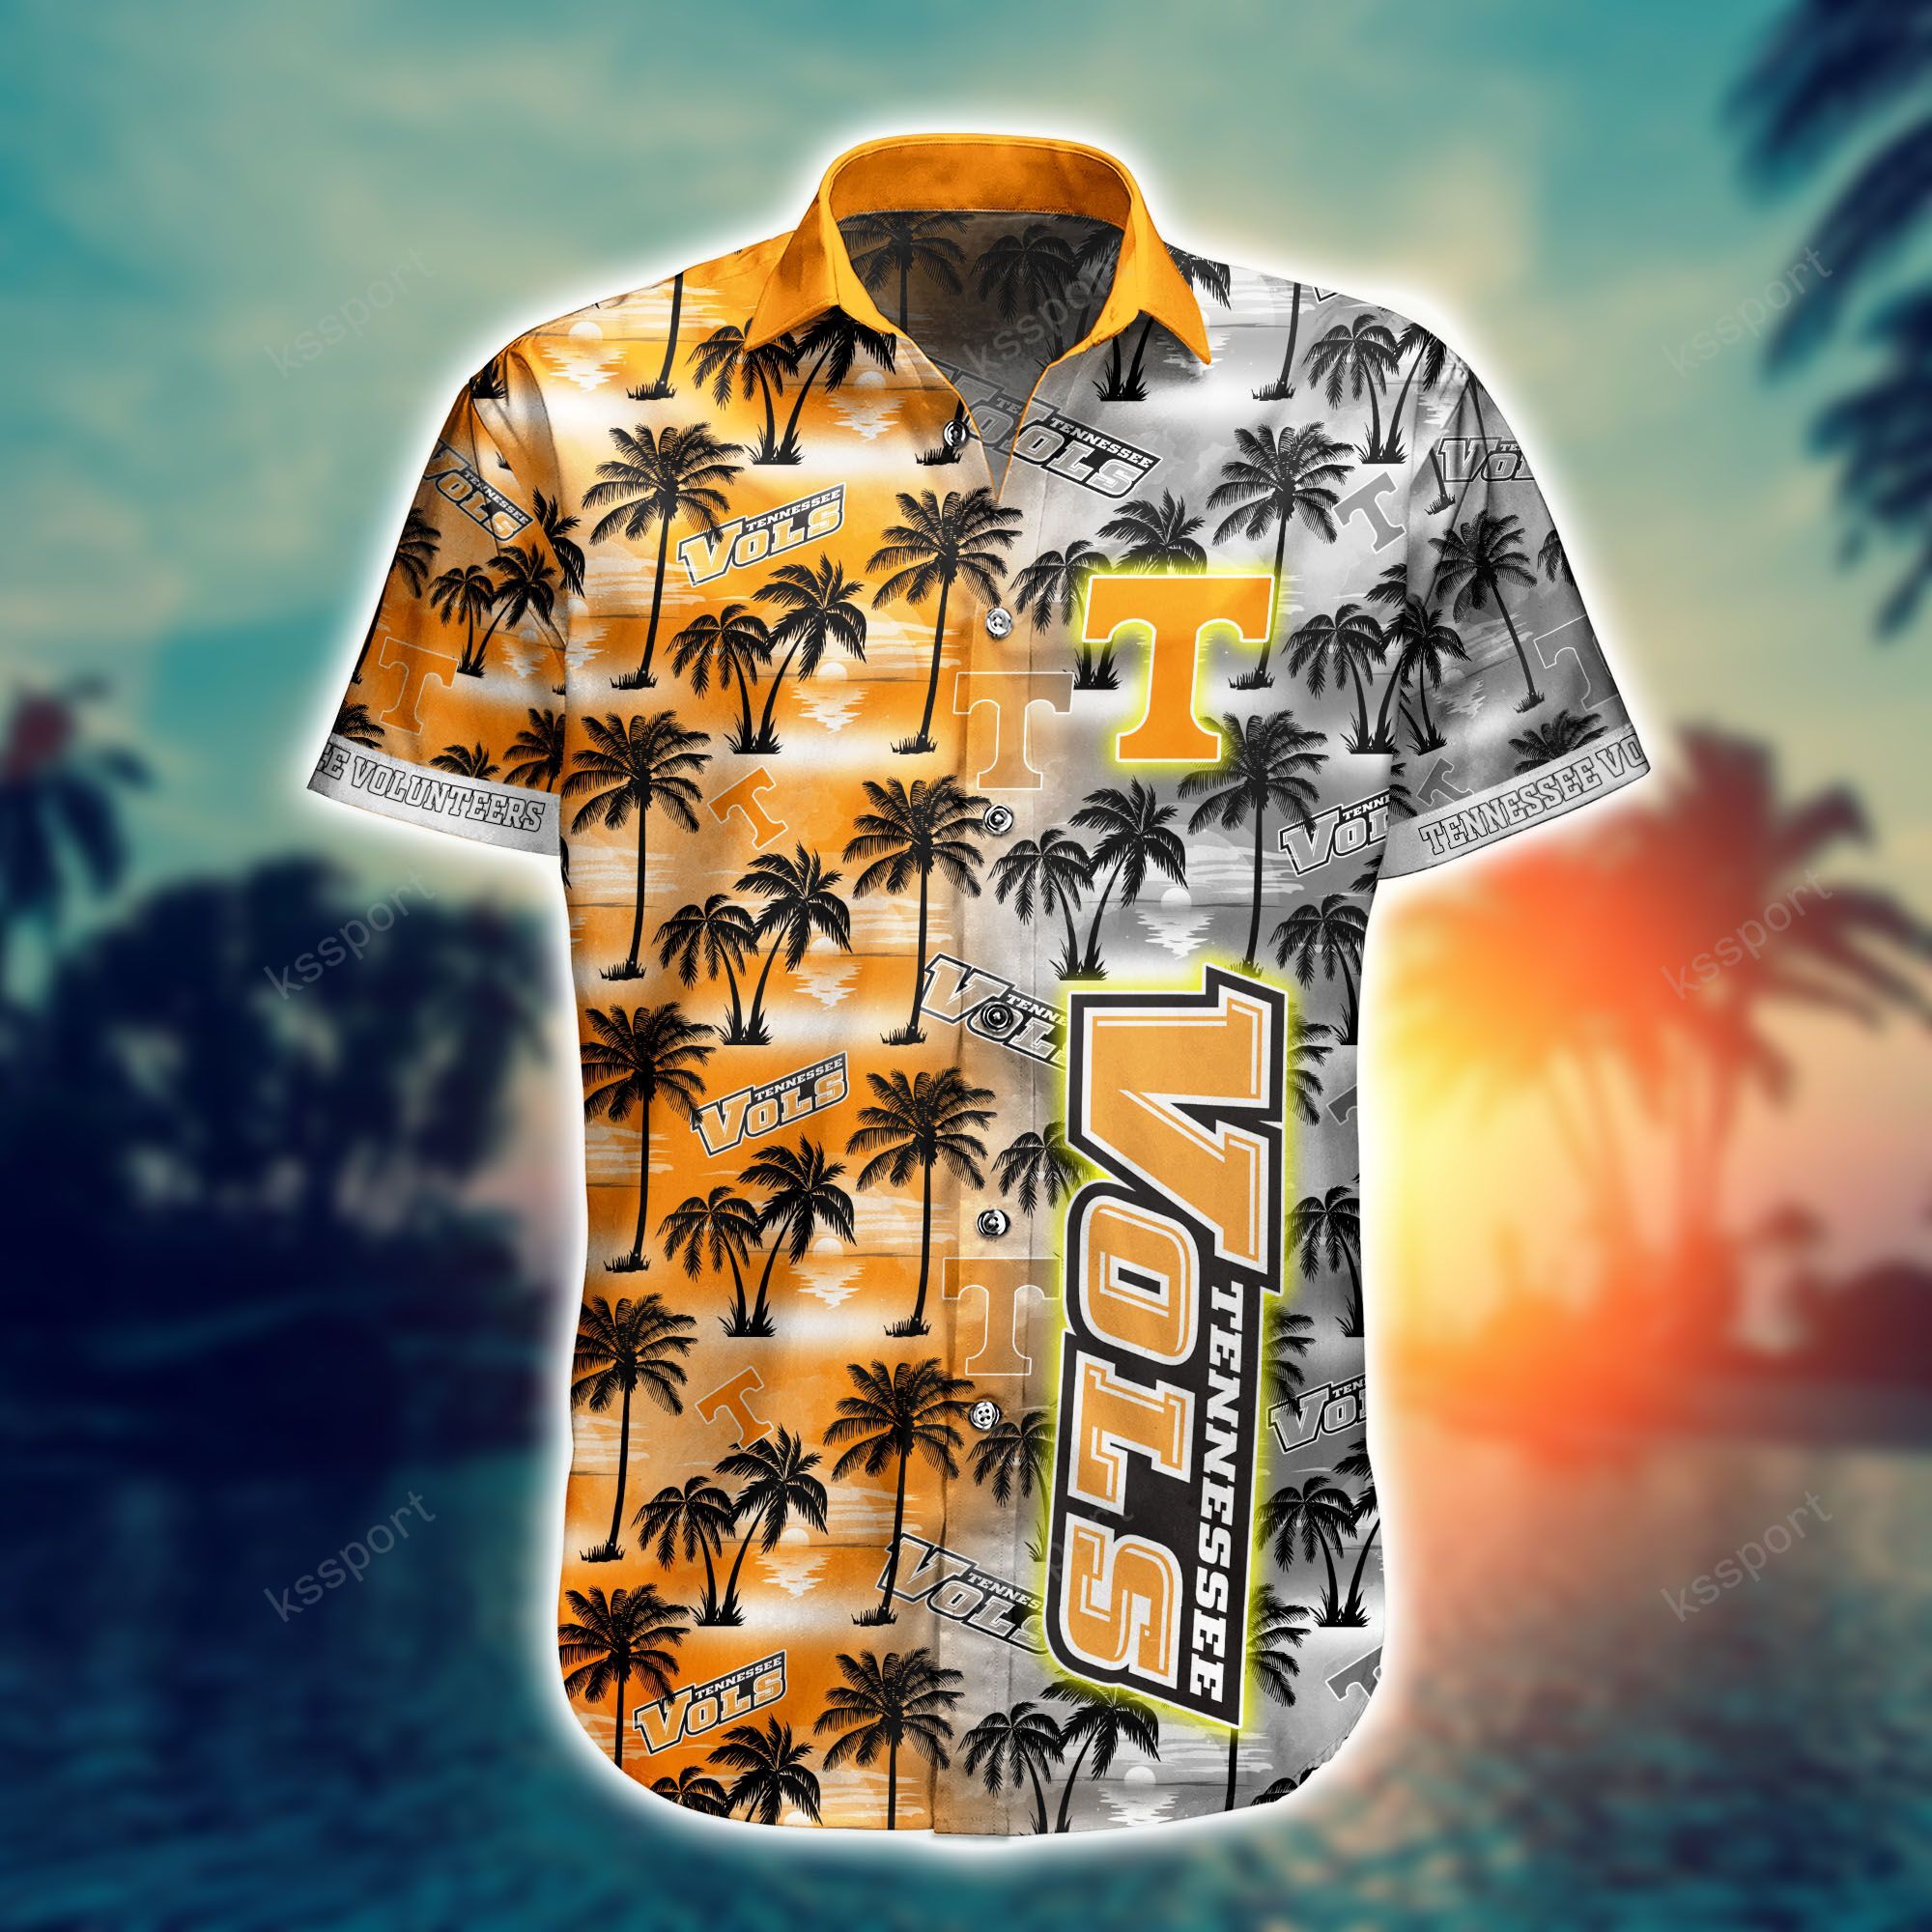 Top cool Hawaiian shirt 2022 - Make sure you get yours today before they run out! 175